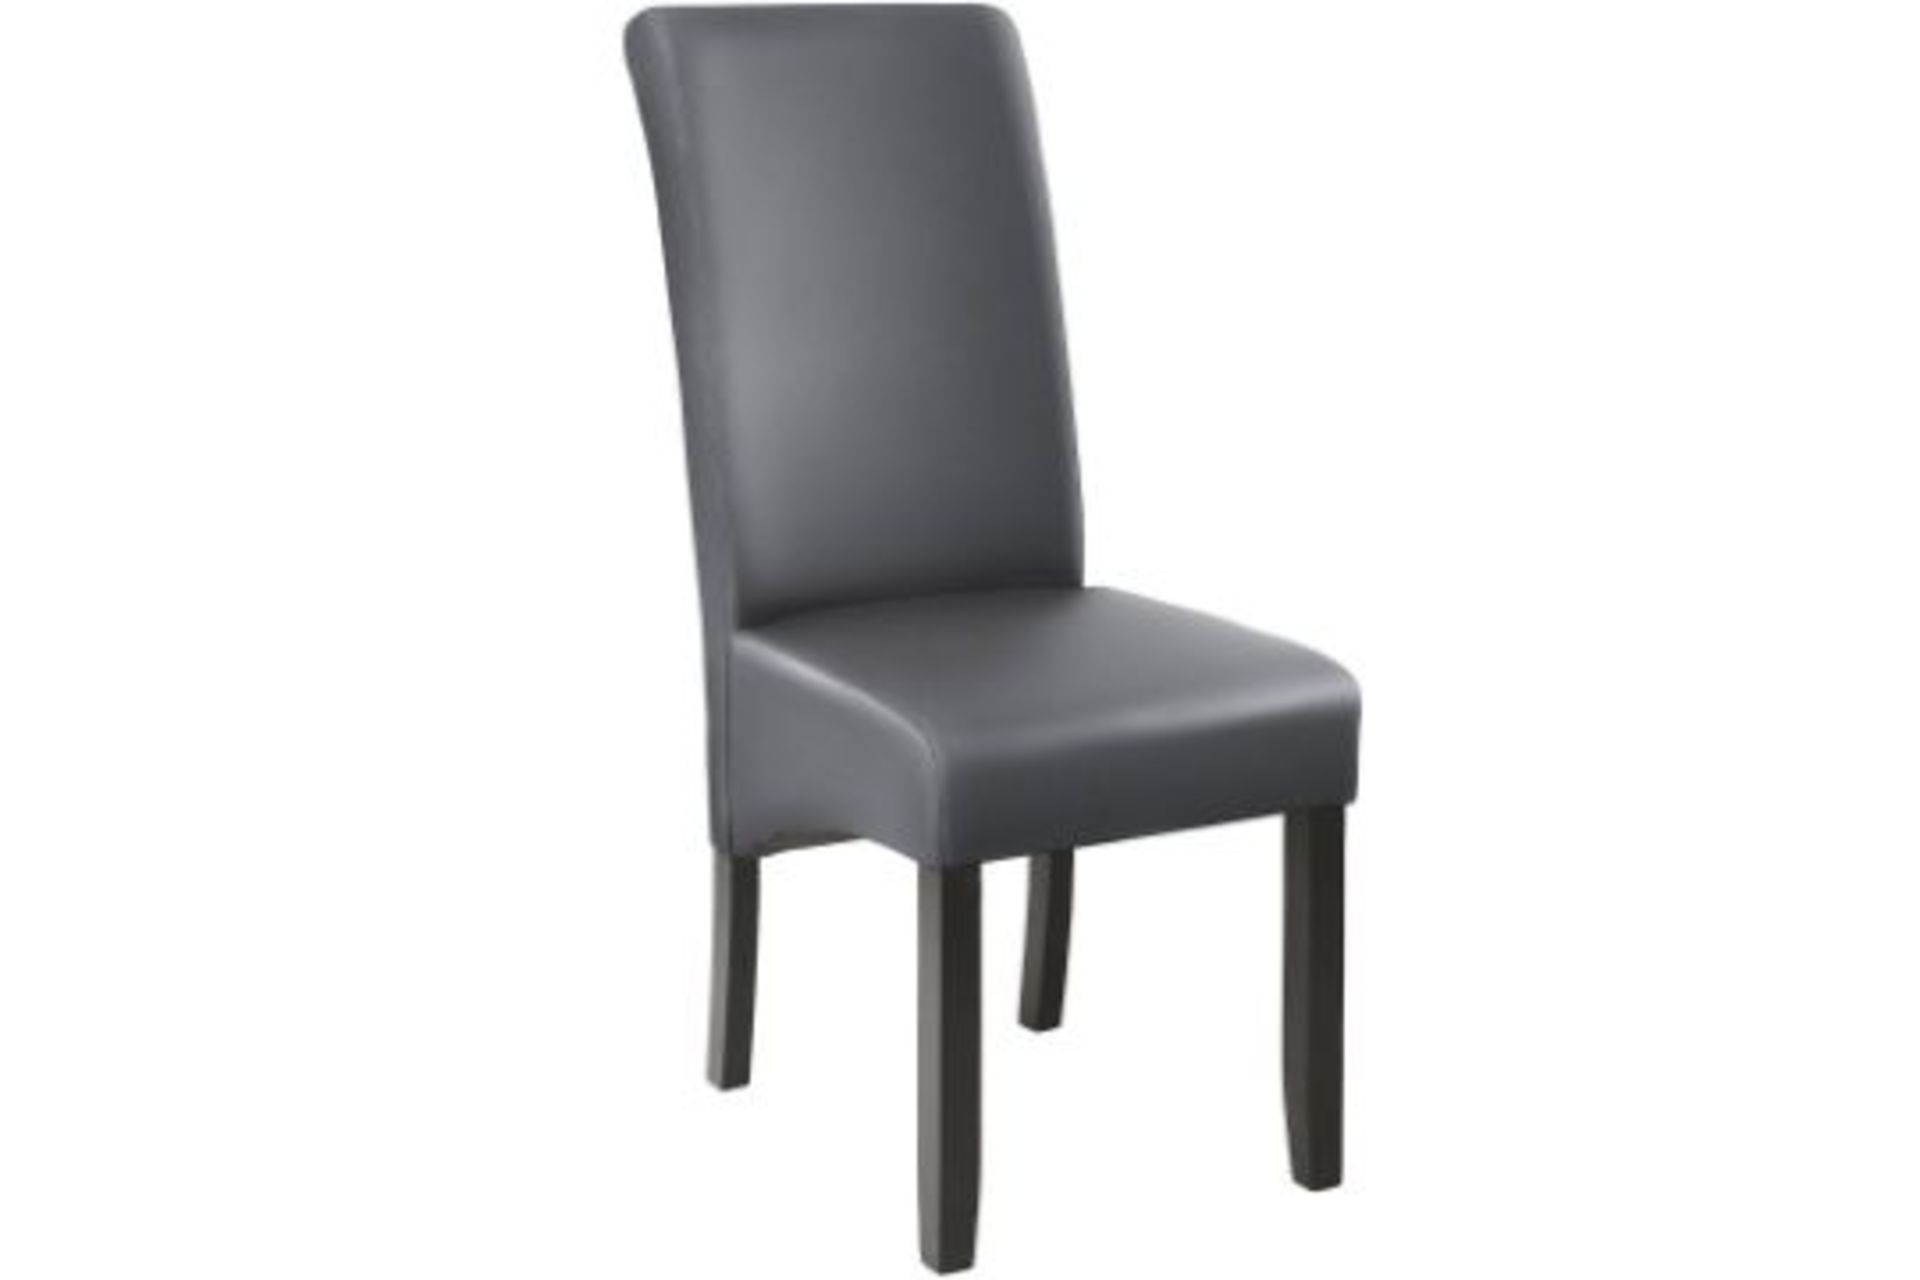 2 x Dining Chair With Ergonomic Seat Shape. - R13.10. RRP £165.00.